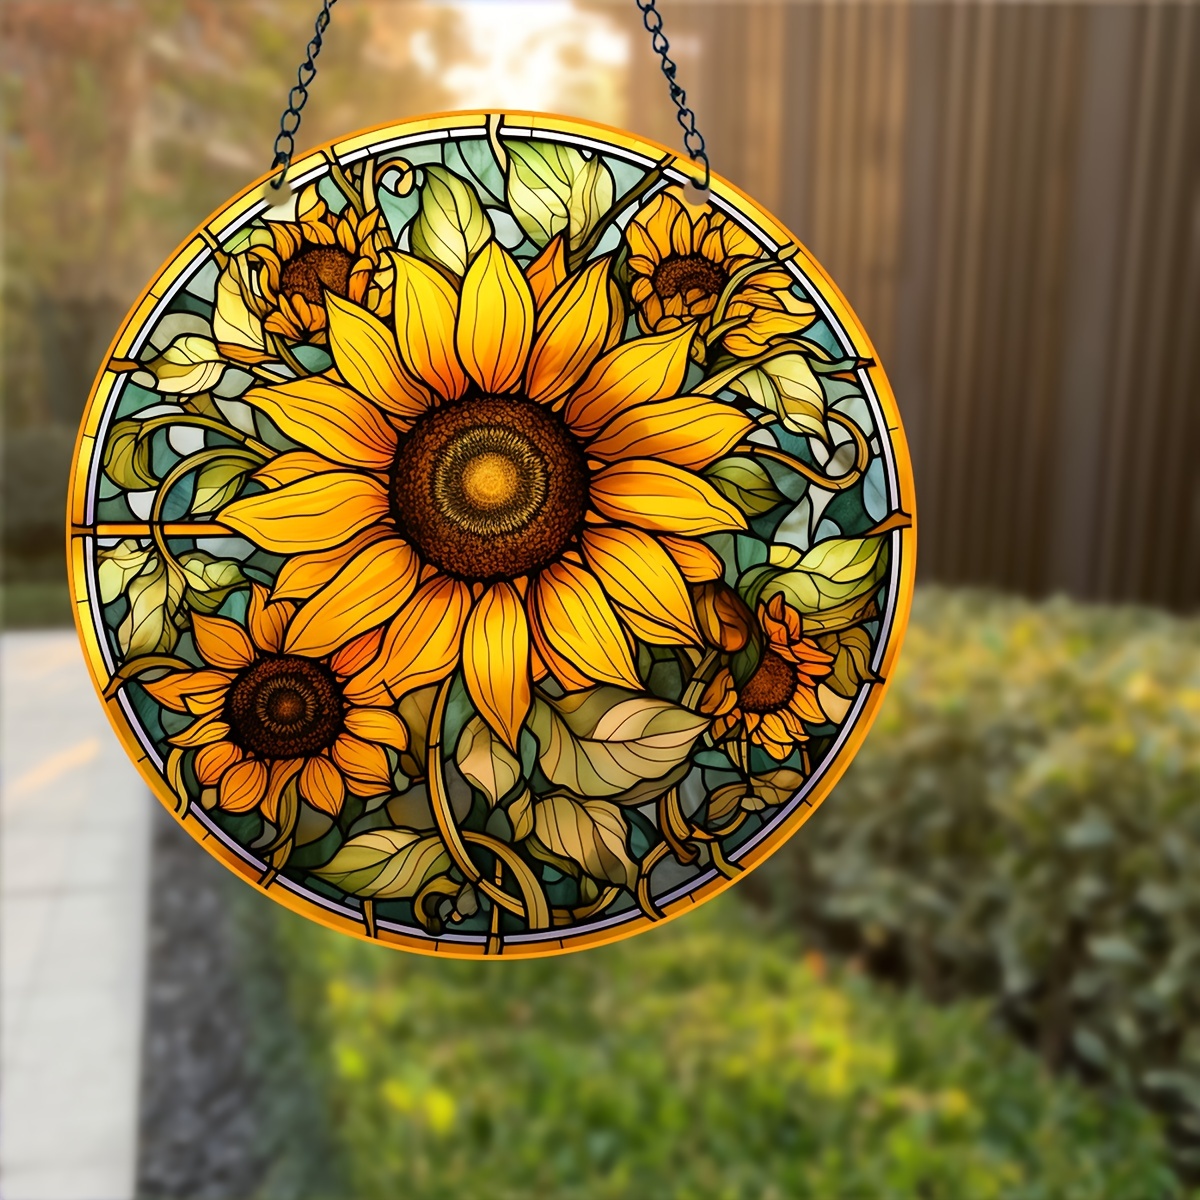 

1pc Sumshine Sunflower Window Hanging, Sky Suncatcher With Metal Chain For Wall Horticultural Ornaments, Home Decor